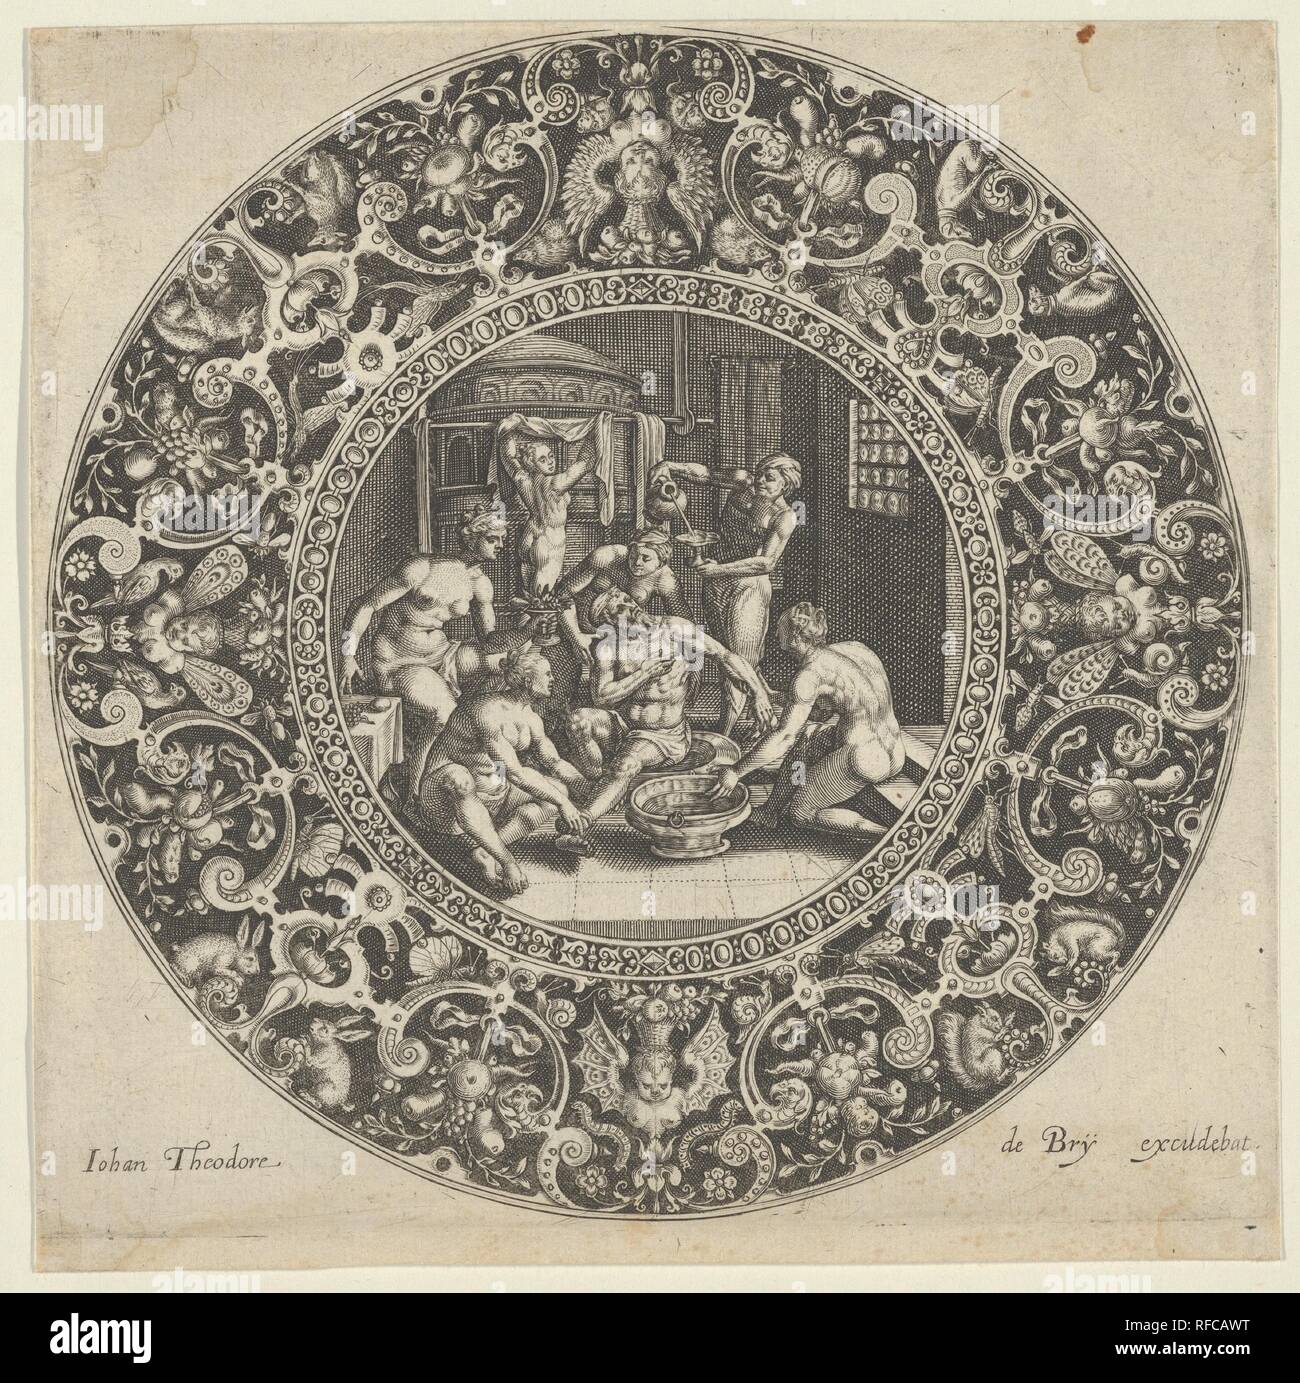 Sardanapal in the Bath. Artist: after Maerten de Vos (Netherlandish, Antwerp 1532-1603 Antwerp); Johann Theodor de Bry (Netherlandish, Strasbourg 1561-1623 Bad Schwalbach); After Crispijn de Passe the Elder (Netherlandish, Arnemuiden 1564-1637 Utrecht). Dimensions: Sheet: 2 1/2 × 2 9/16 in. (6.4 × 6.5 cm). Date: 1576-1623.  A scene with the bearded figure of Sardanapal, the Assyrian king, in a bath at center, surrounded by six attending slaves. The scene is framed by a circular ornamental frieze with pairs of animals and groupings of fruit. Copied from a rectangular print by Crispijn de Passe  Stock Photo